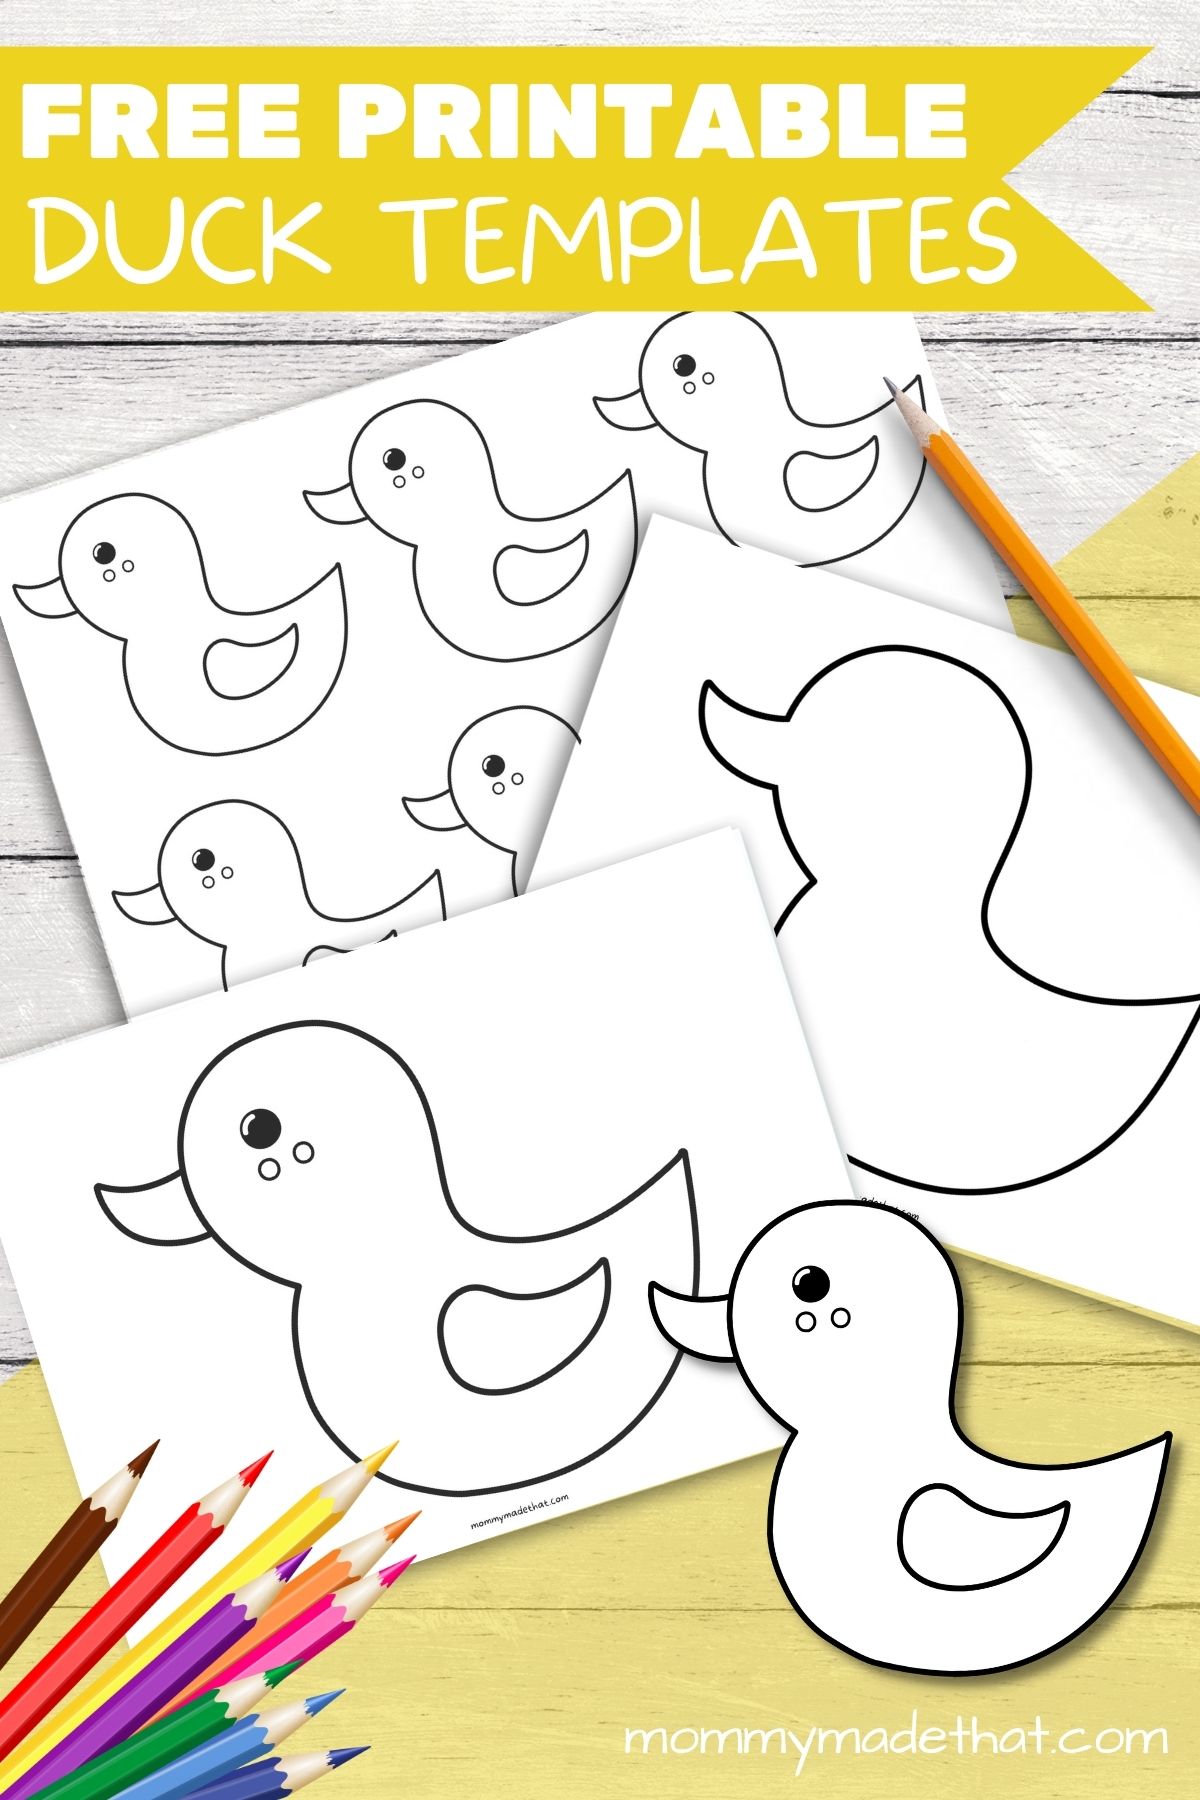 Free Printable Duck Templates for Ducky Crafts and Fun